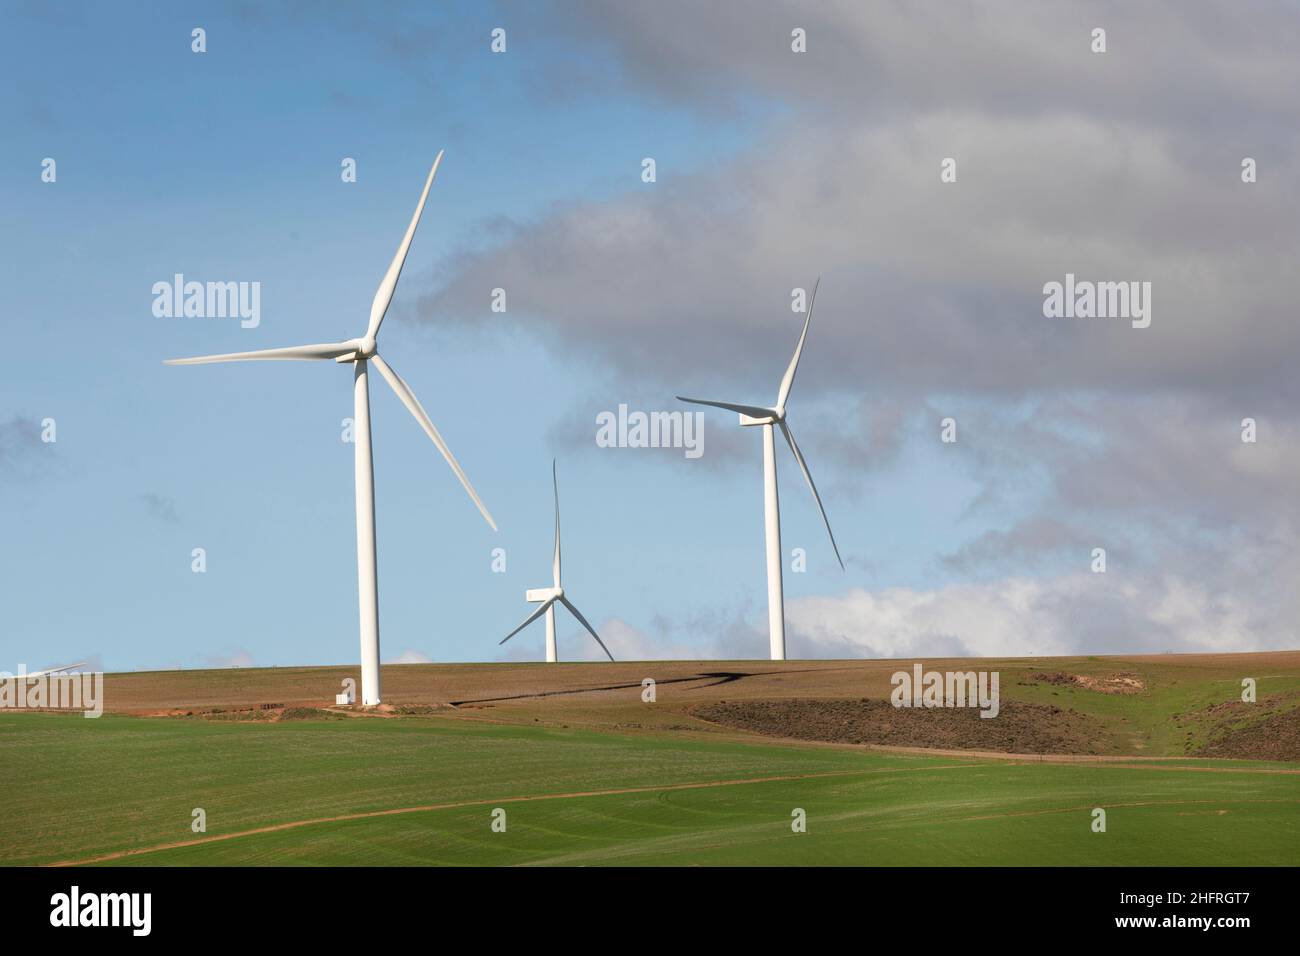 Power generating wind turbines in an agricultural field in South Africa. Stock Photo